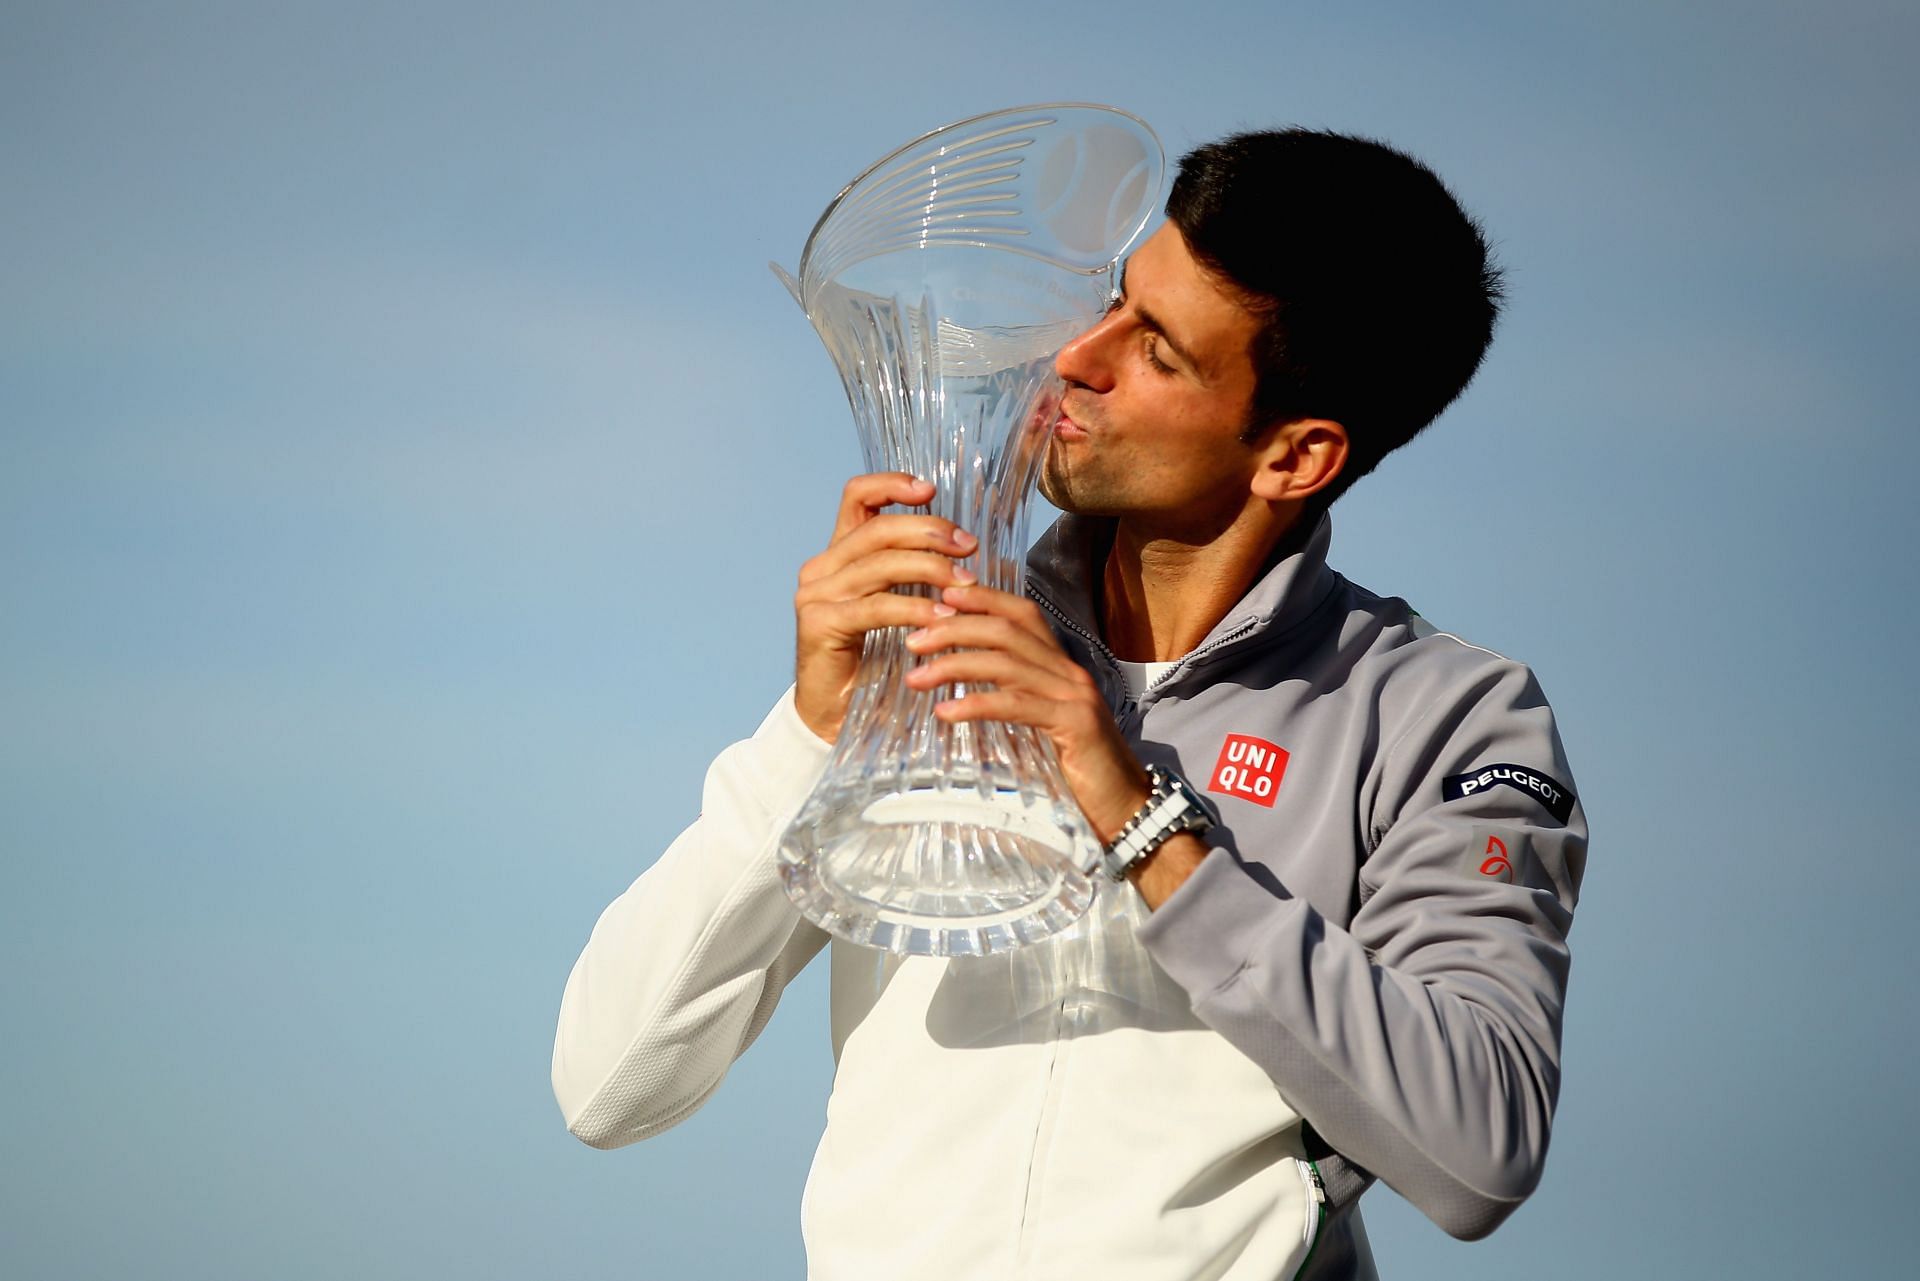 Novak Djokovic pictured with the 2014 Miami Open trophy